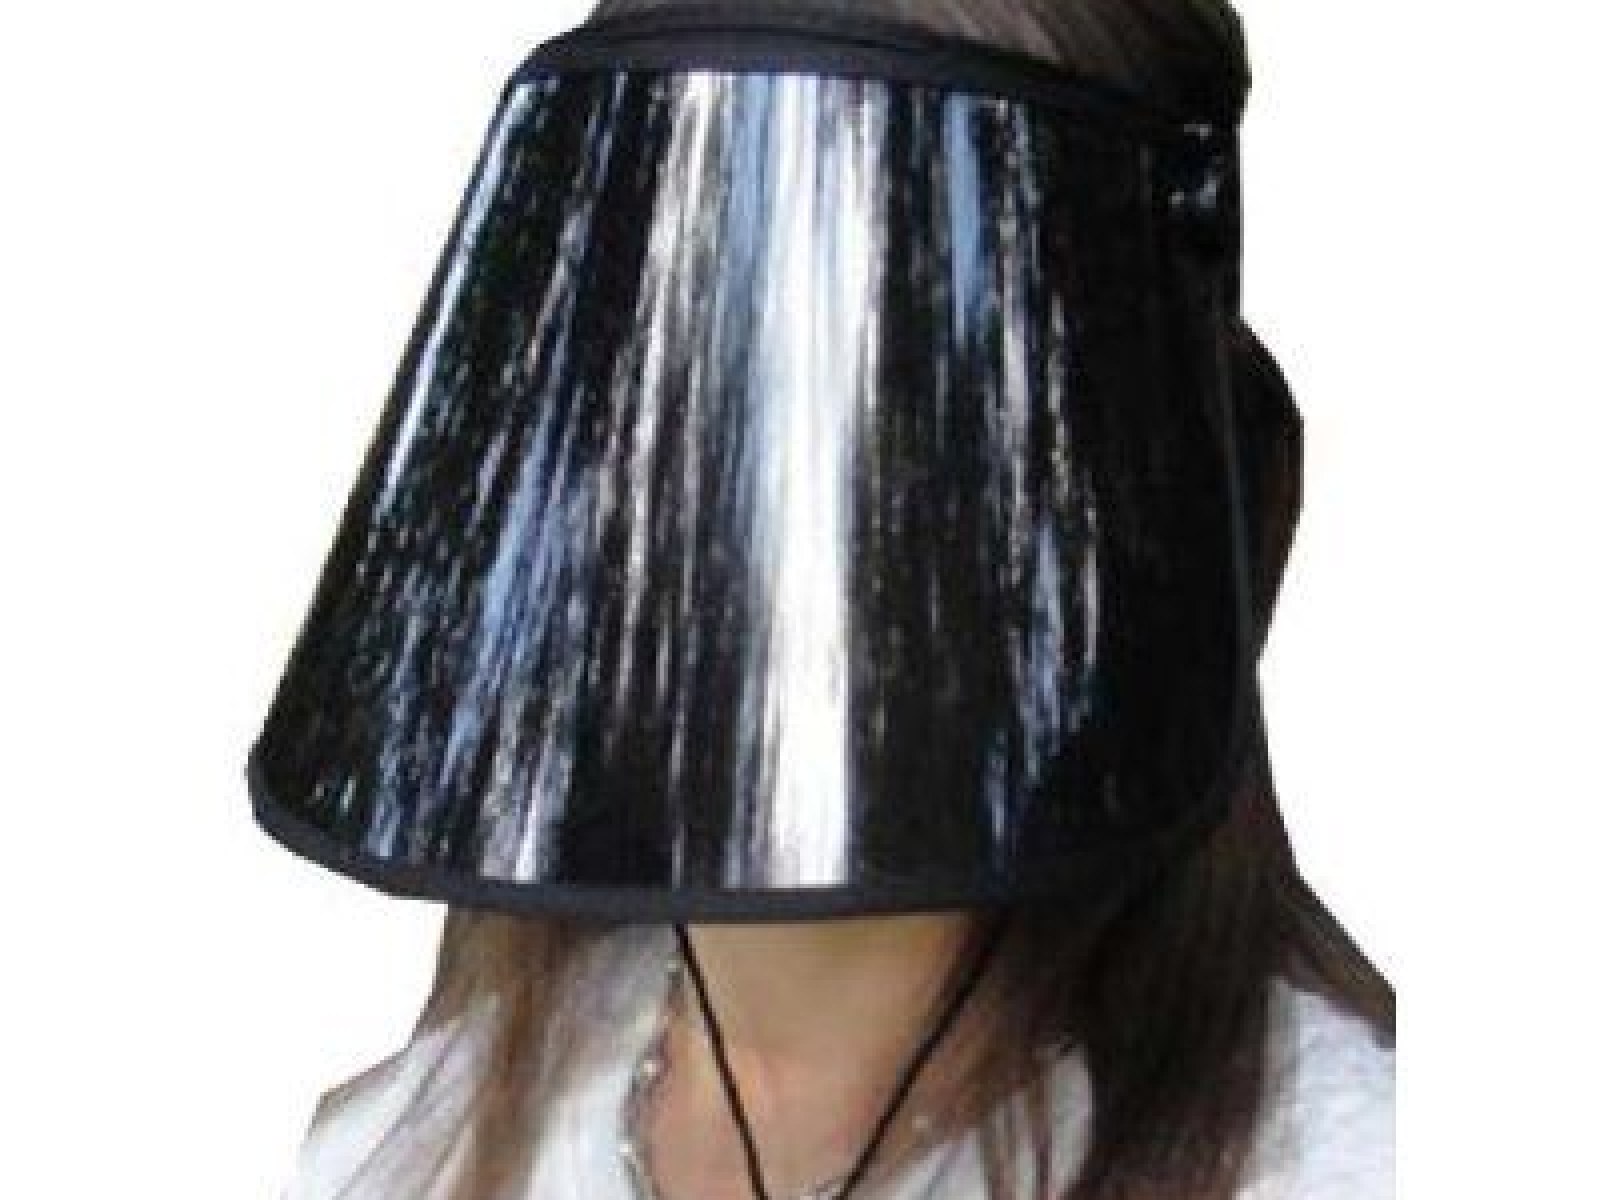 Full-Face Sun Visors In China Make People Look Like Darth Vader, But Is It  Effective UV Protection?